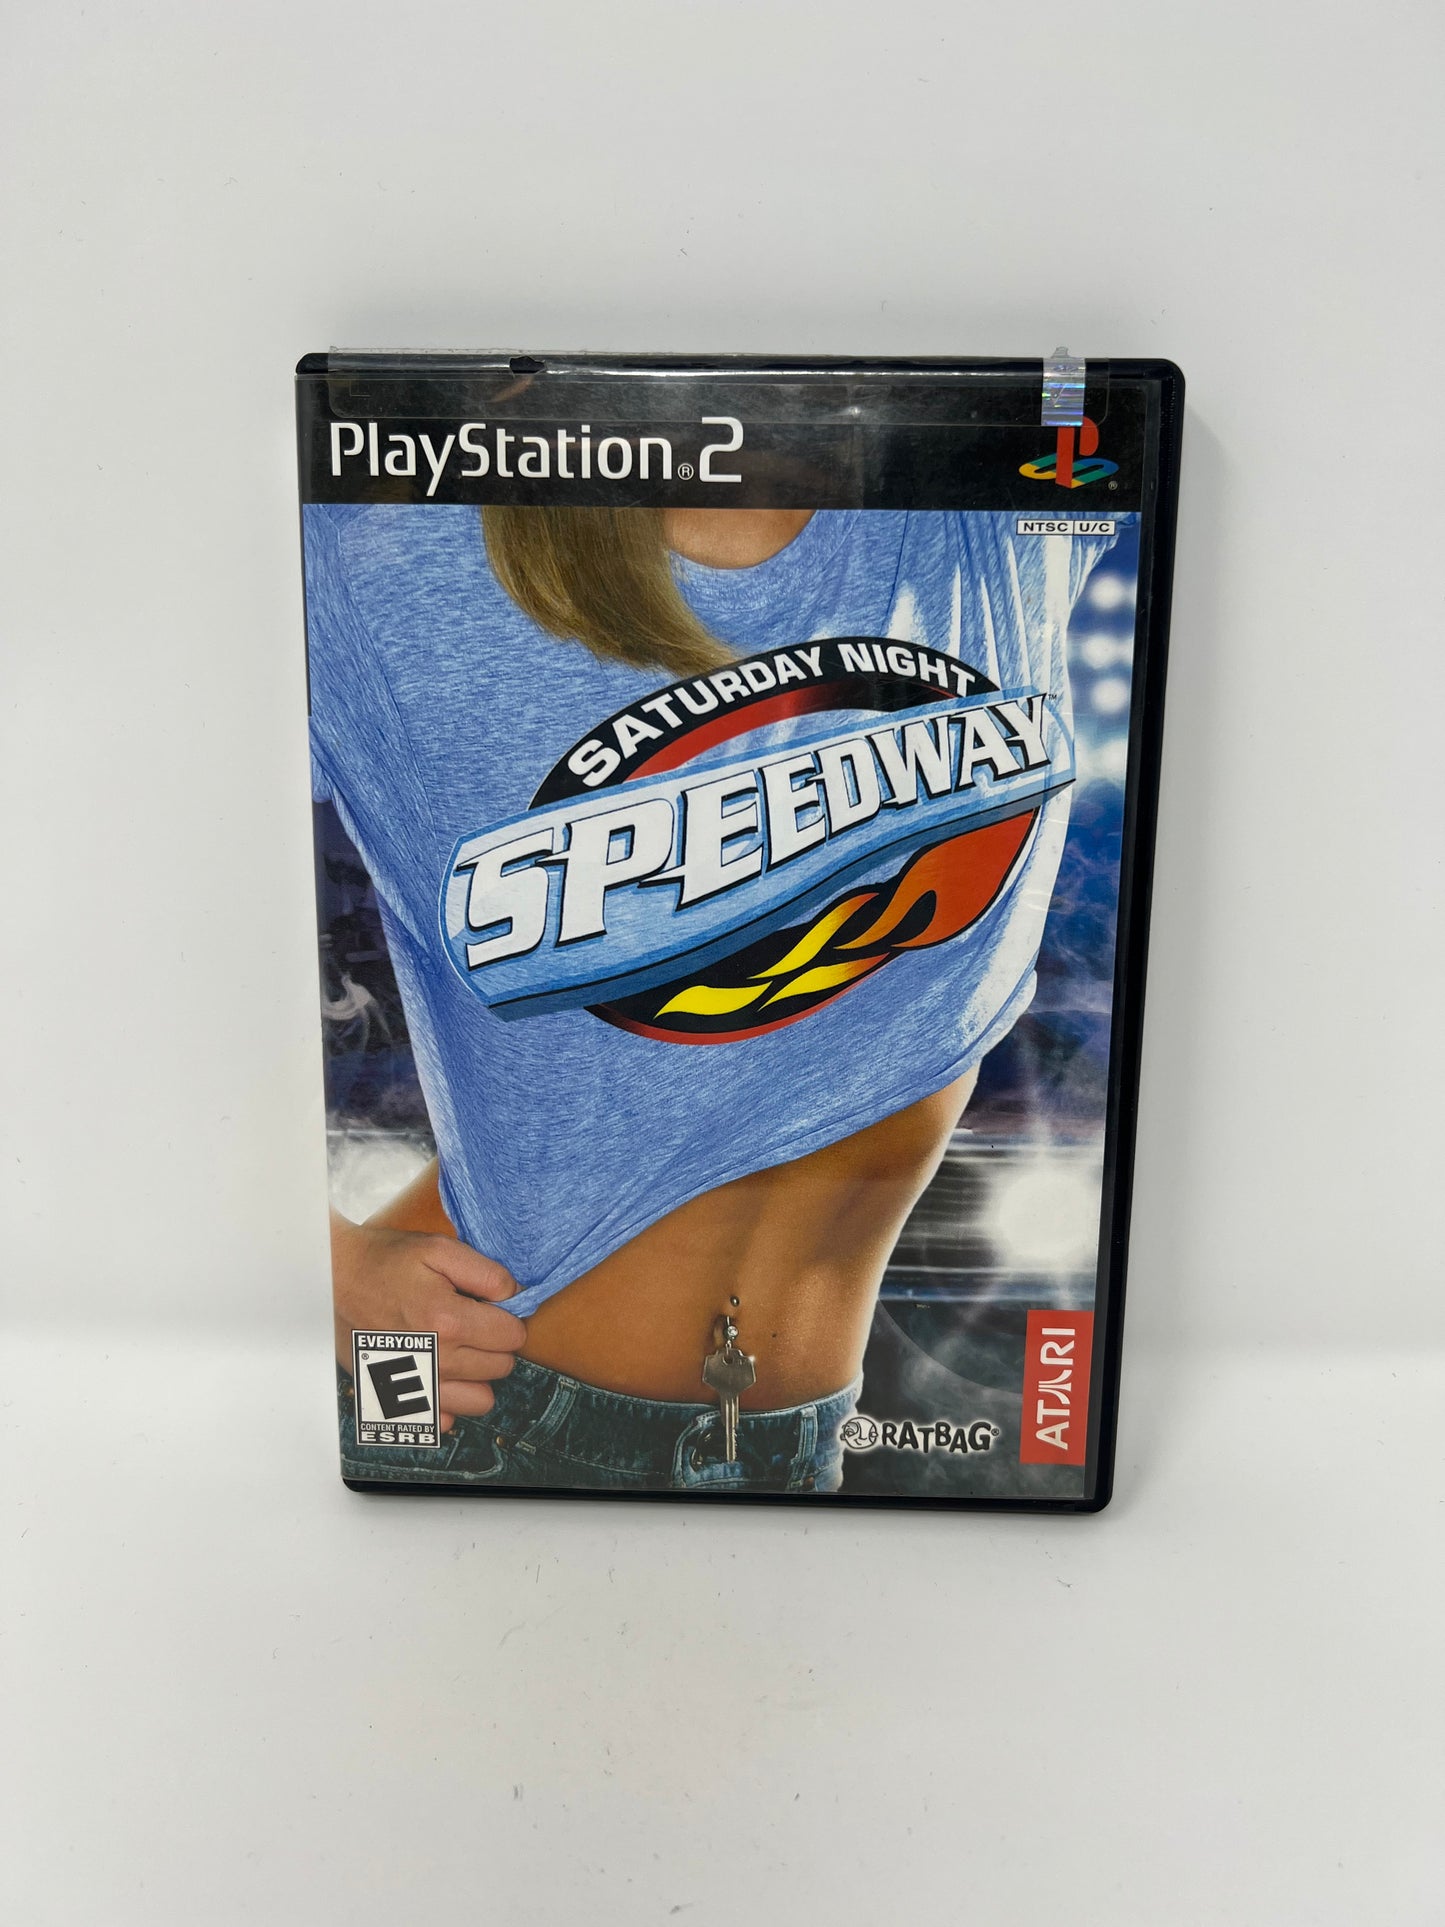 Saturday Night Speedway - PS2 Game - Used